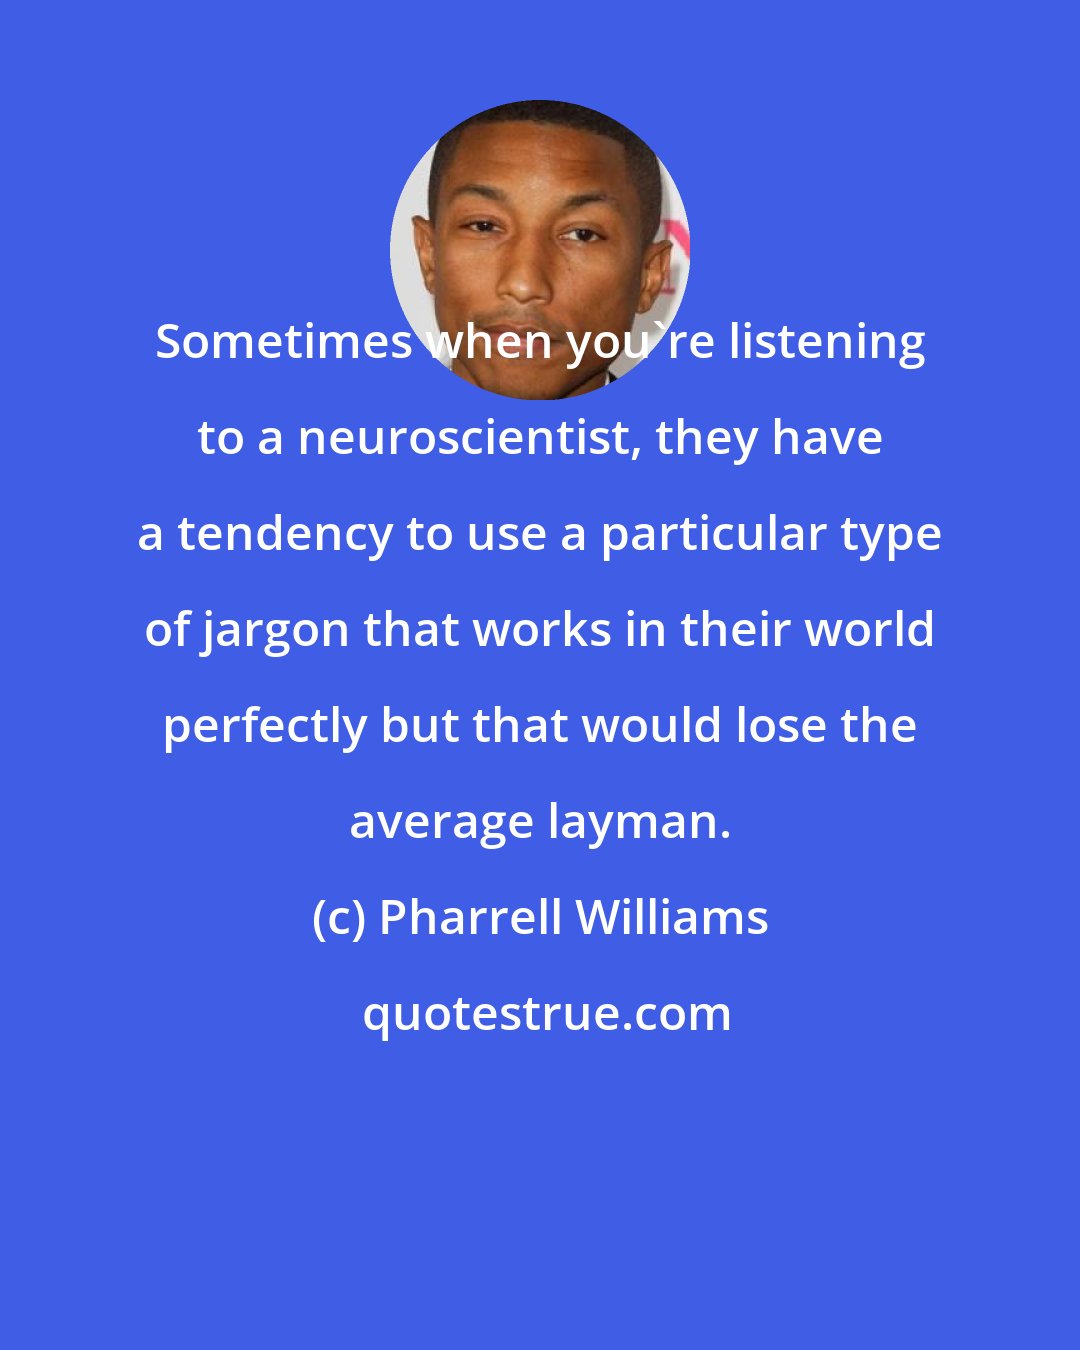 Pharrell Williams: Sometimes when you're listening to a neuroscientist, they have a tendency to use a particular type of jargon that works in their world perfectly but that would lose the average layman.